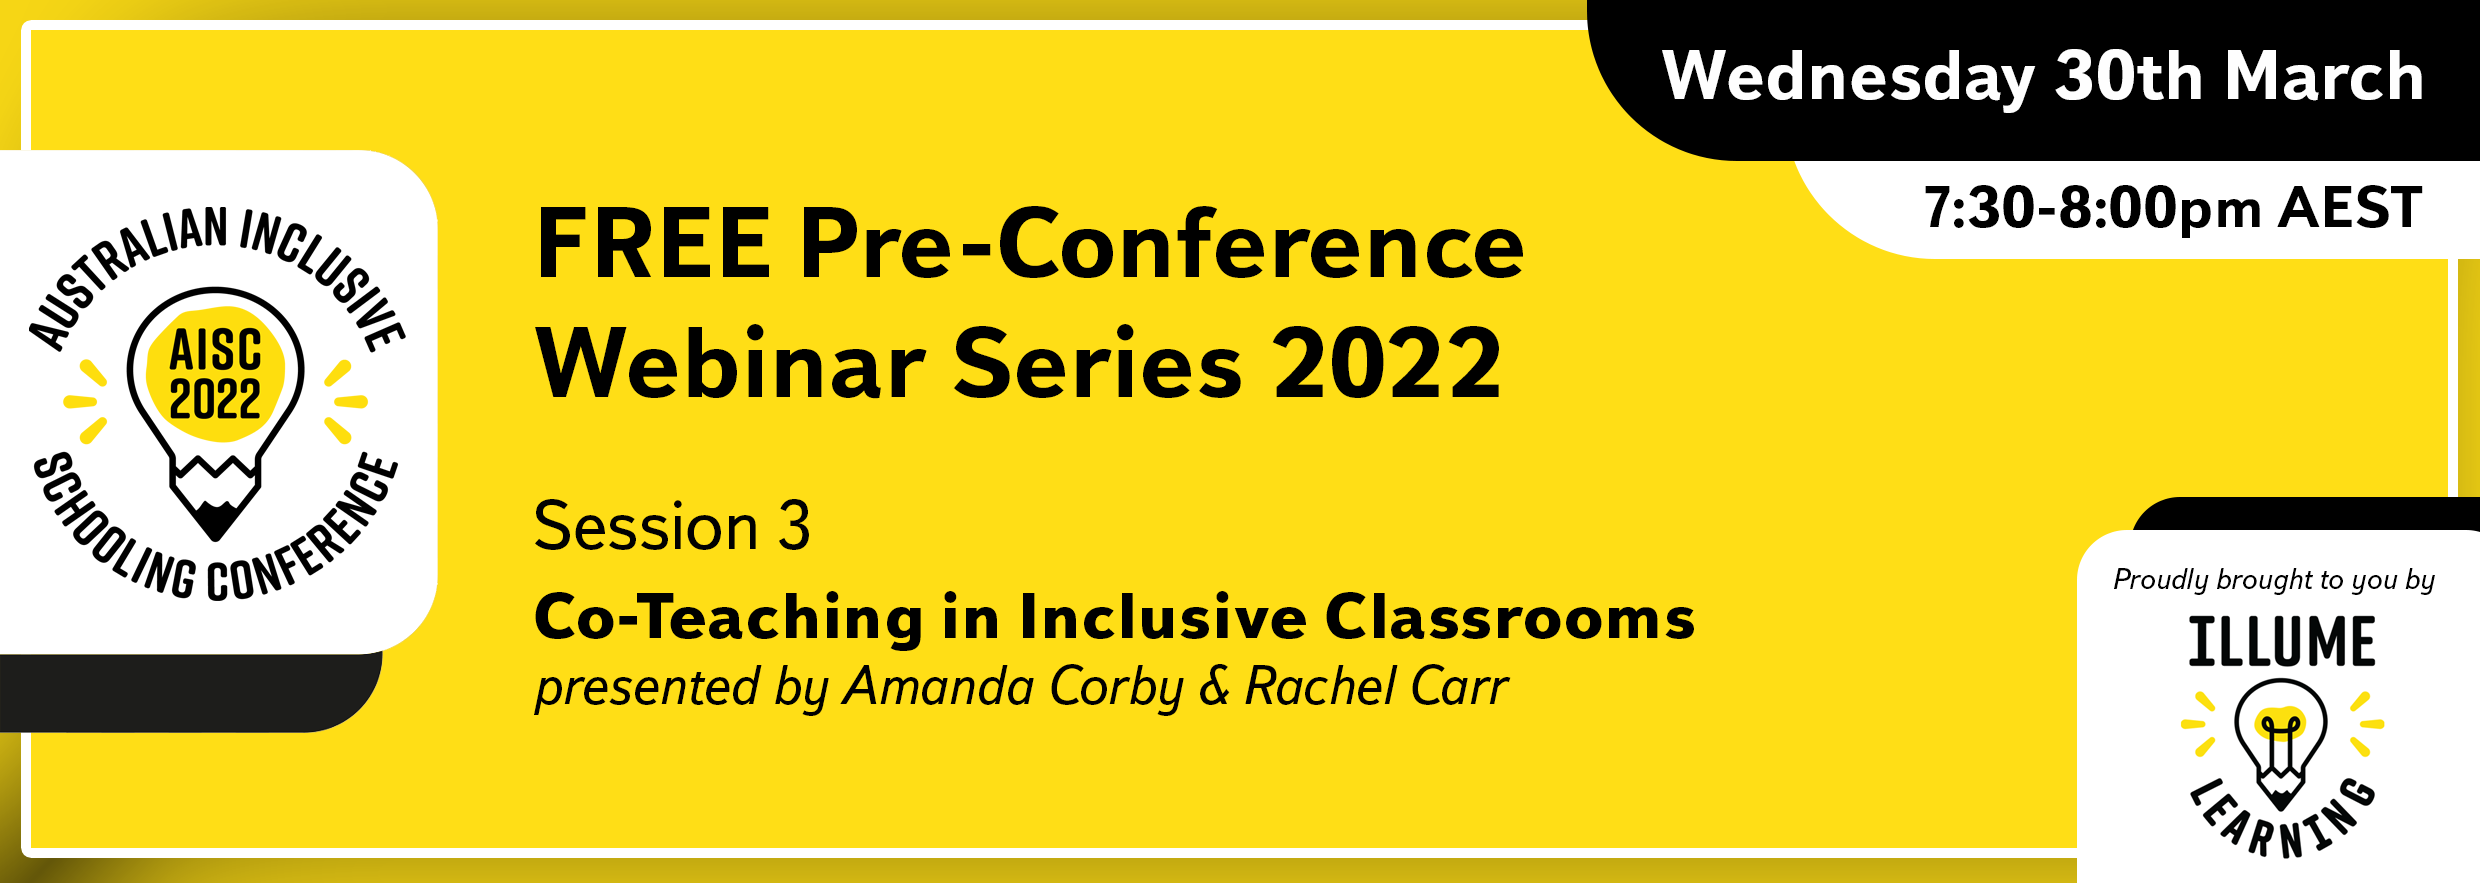 Image Description: Black text on a yellow background reads 'Australian Inclusive Schooling Conference, 'FREE Pre-conference Webinar Series 2022. Session 3. Co-Teaching in Inclusive Classrooms. presented by Amanda Corby & Rachel Carr. Wednesday 30th March 7:30-8:00pm AEST. Proudly brought to you by Illume Learning'